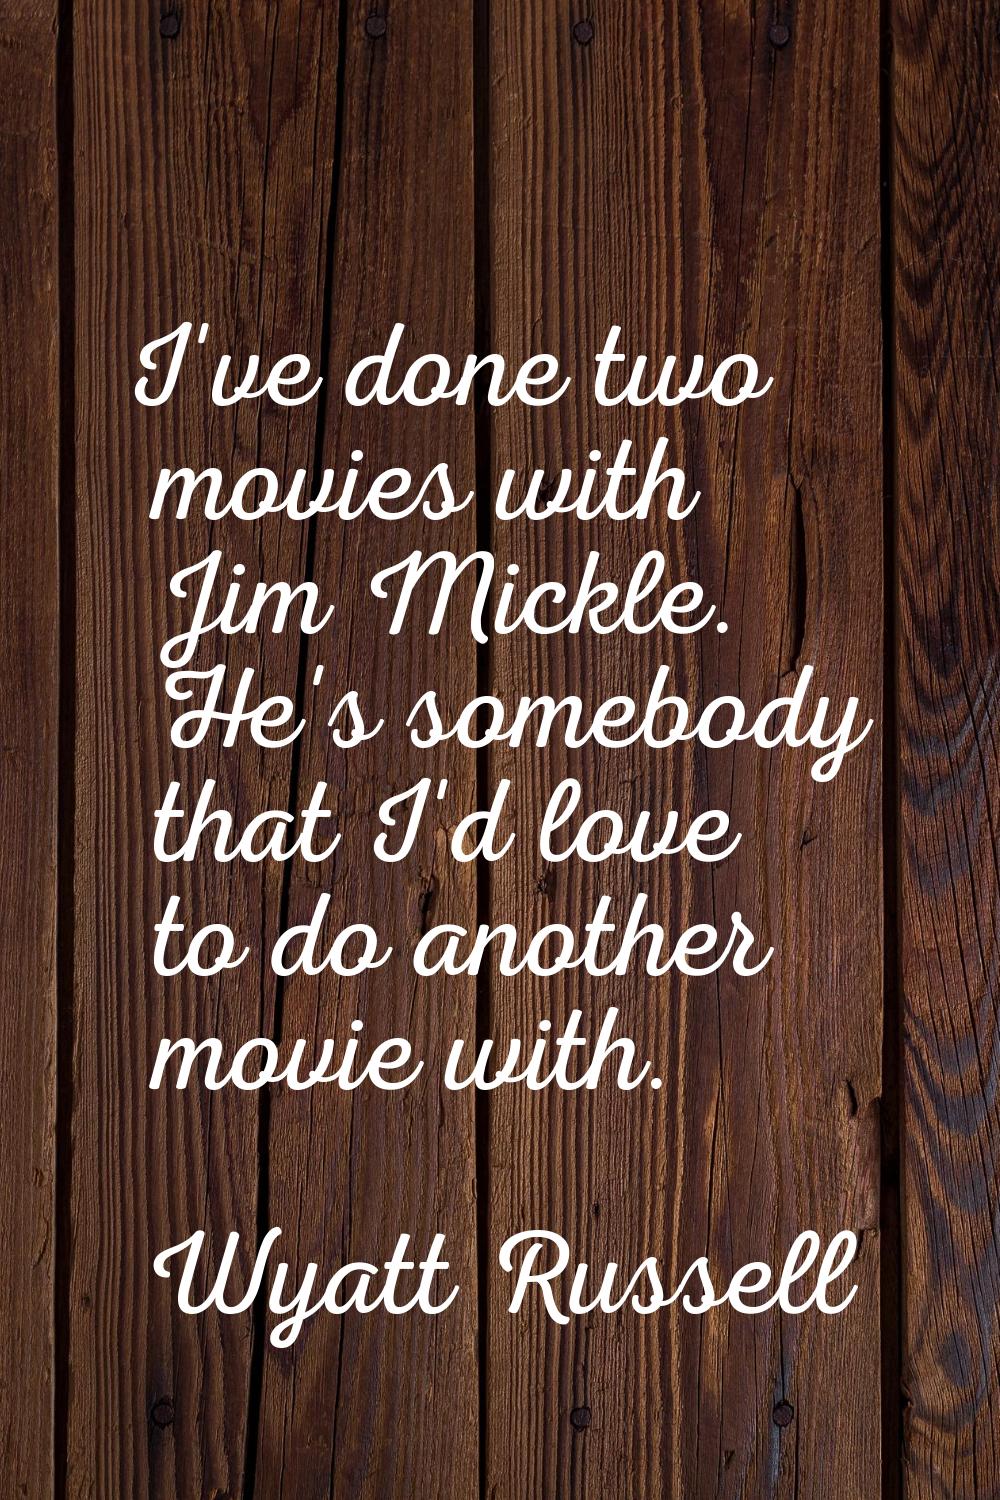 I've done two movies with Jim Mickle. He's somebody that I'd love to do another movie with.